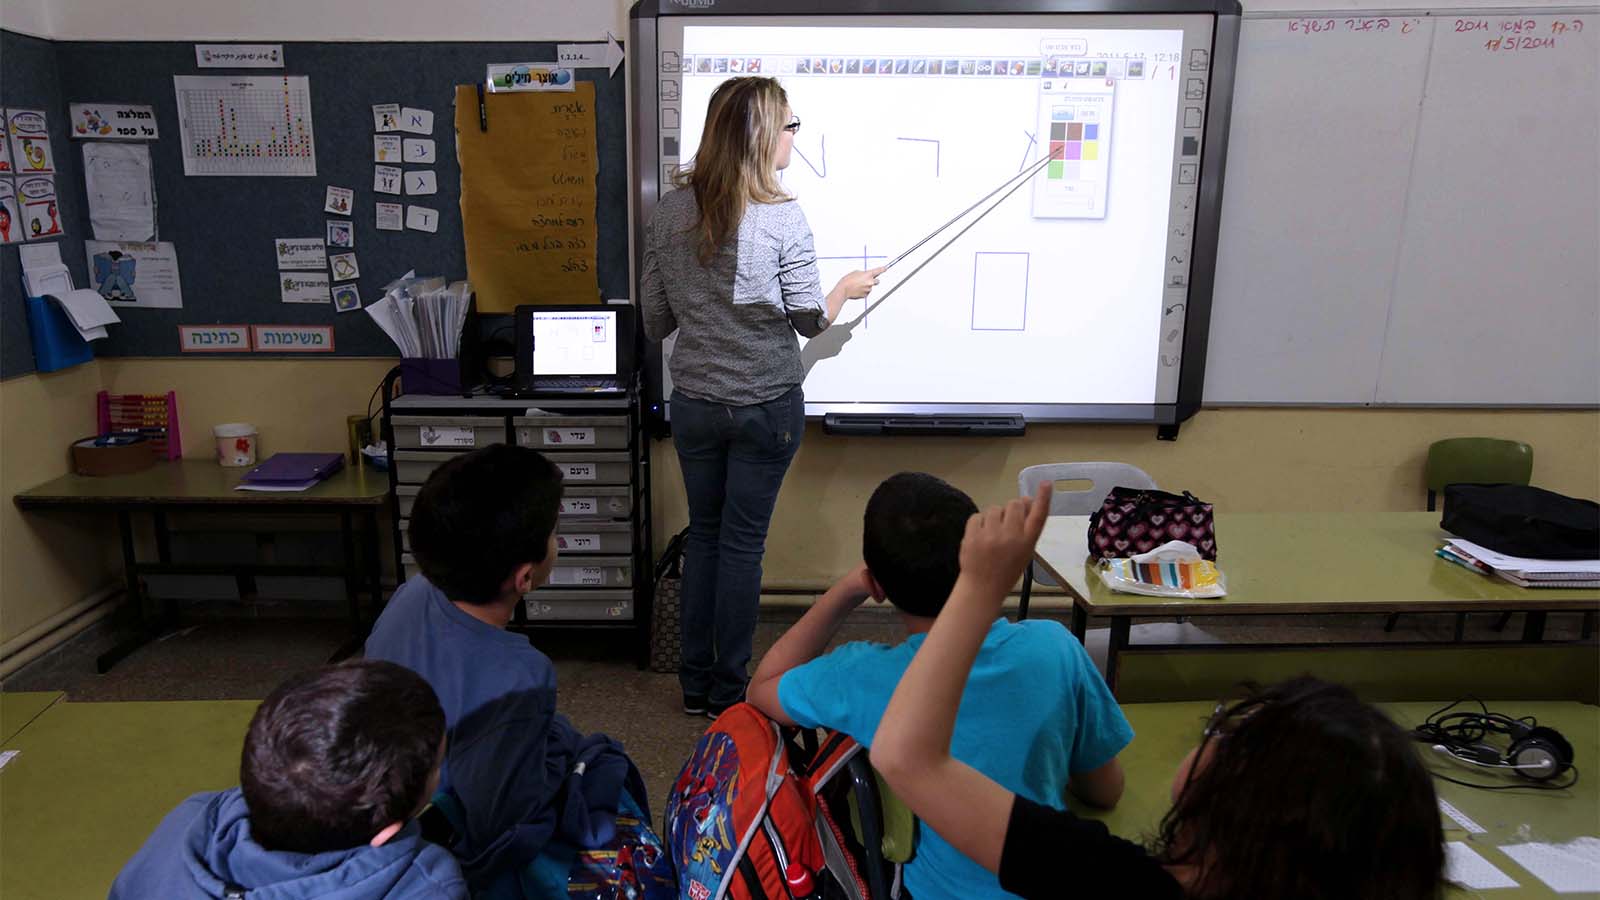 An Israeli teacher using a touch-screen smart-board in a class room during a lesson at the Janusz Korczak school in Jerusalem. May 17, 2011.(Photo by Kobi Gideon / Flash90)